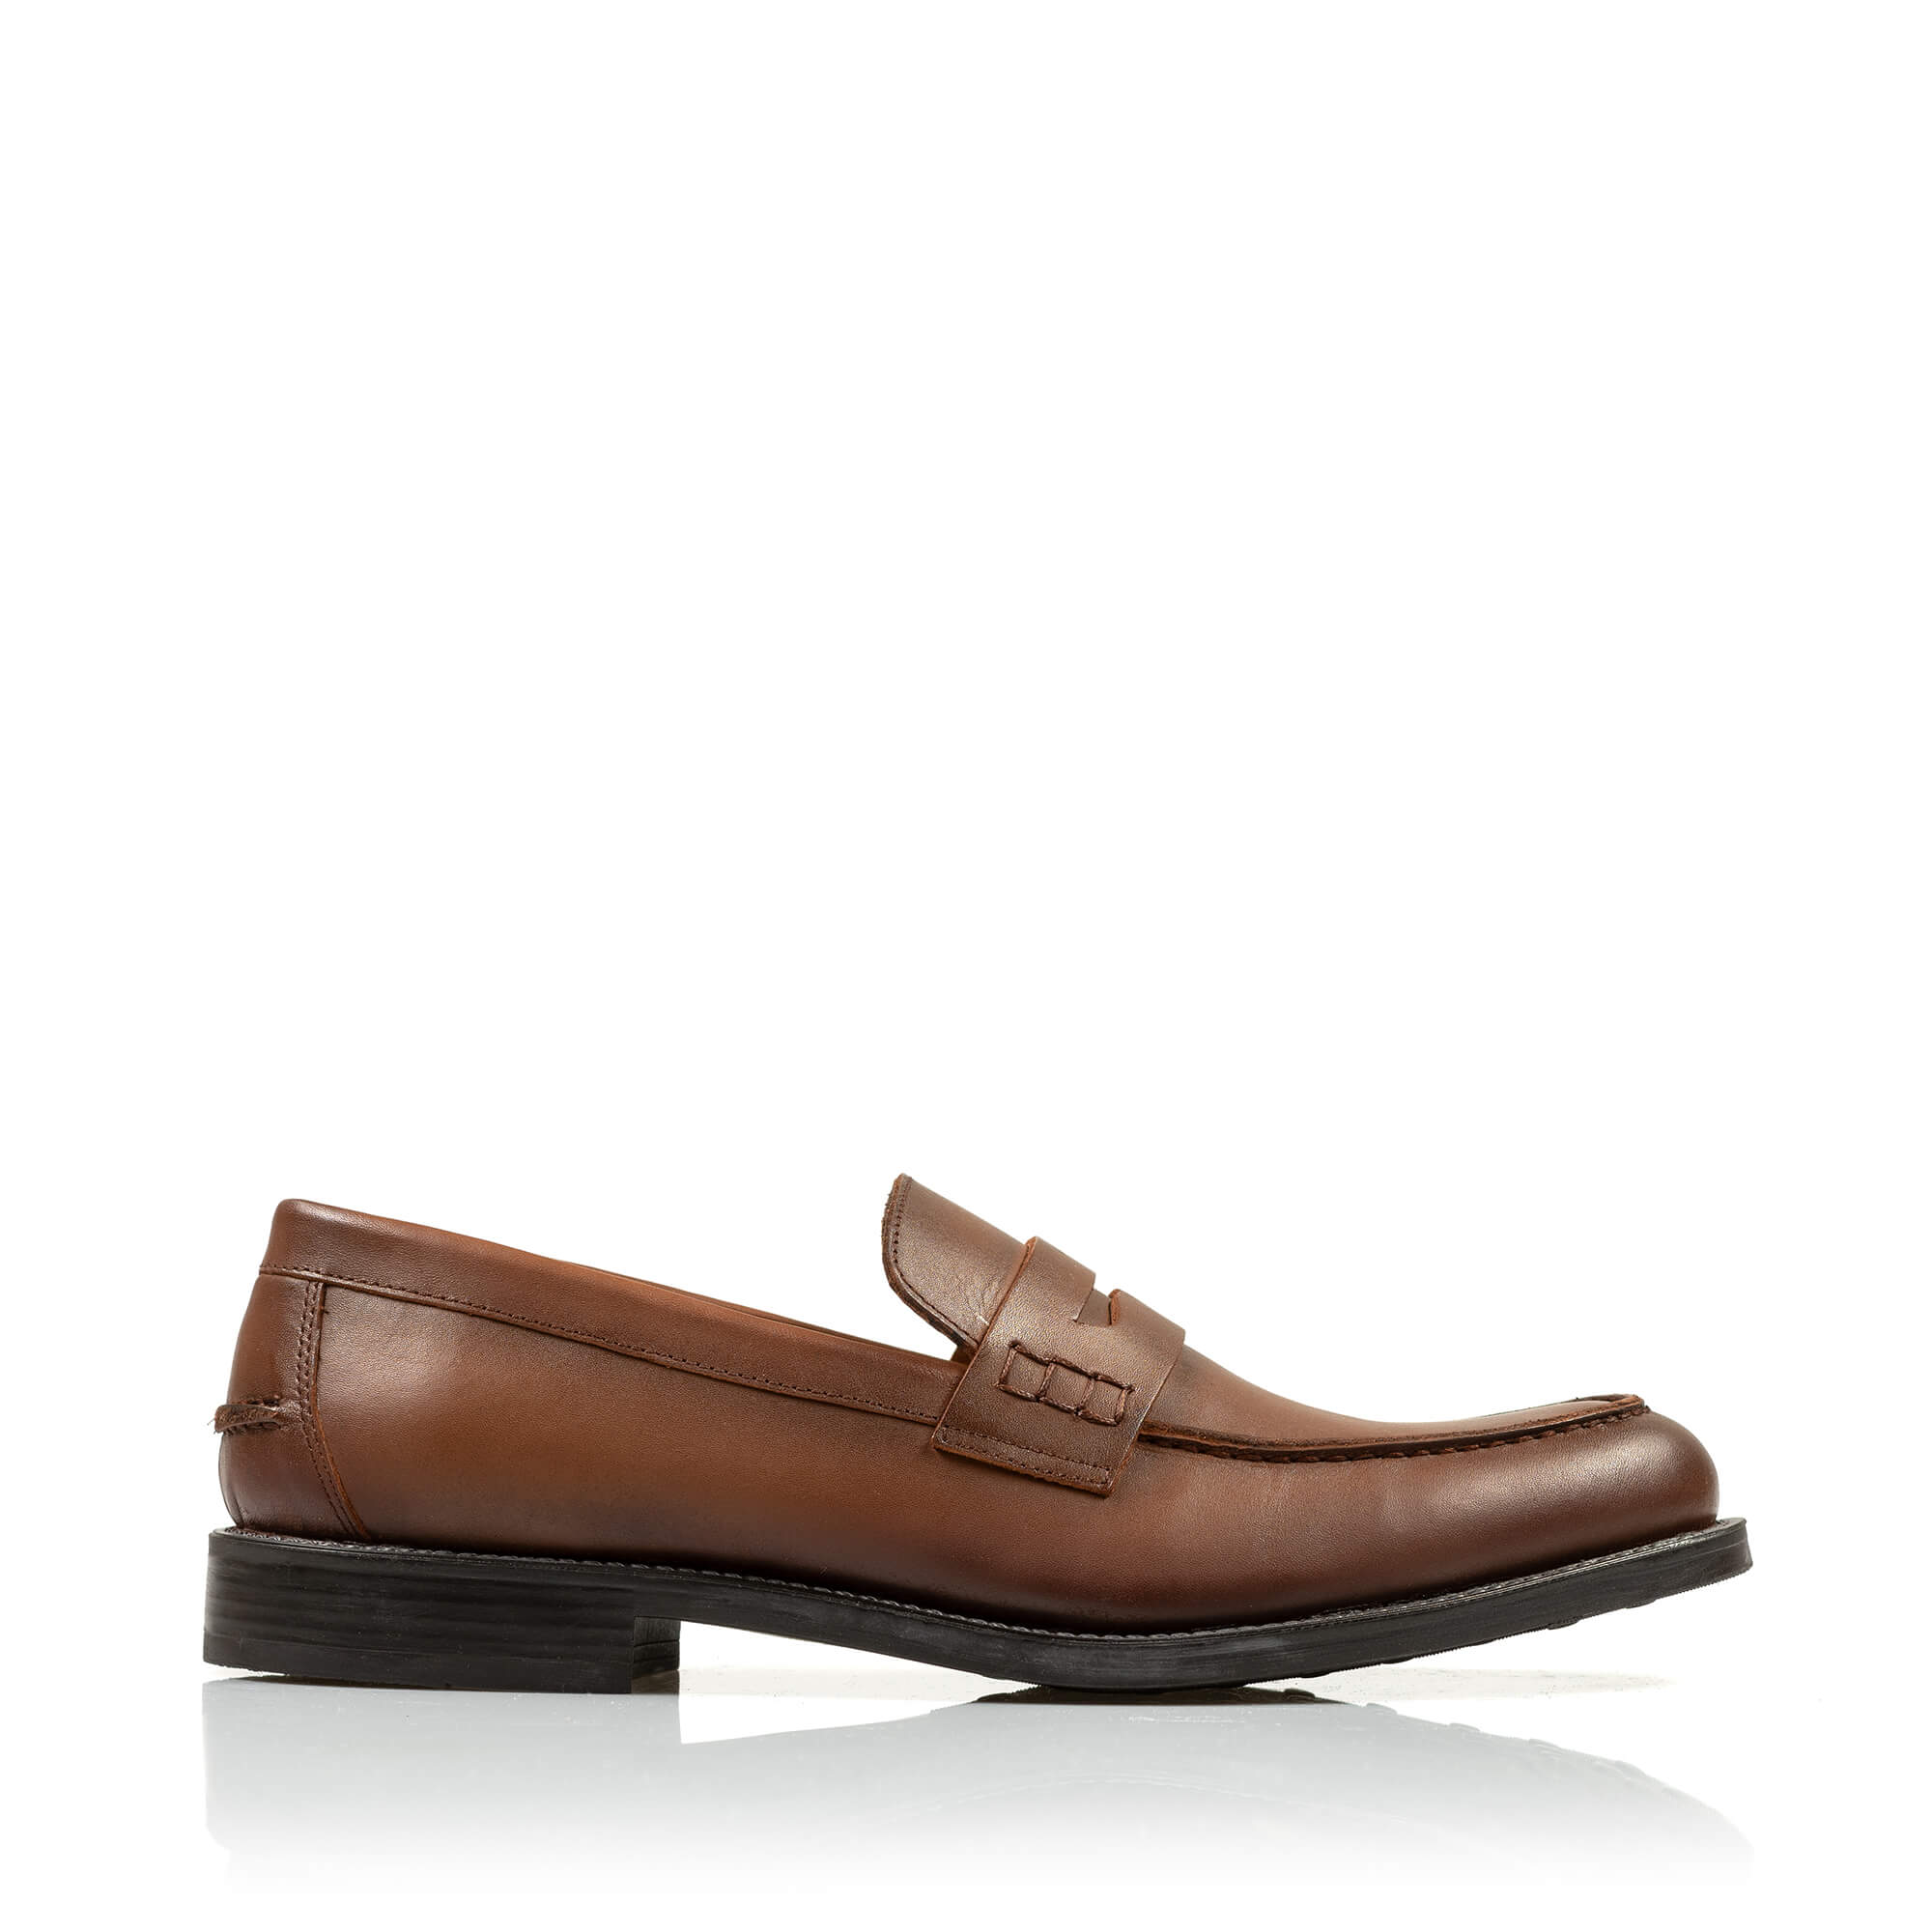 LOAFER LEATHER SHOES XLI